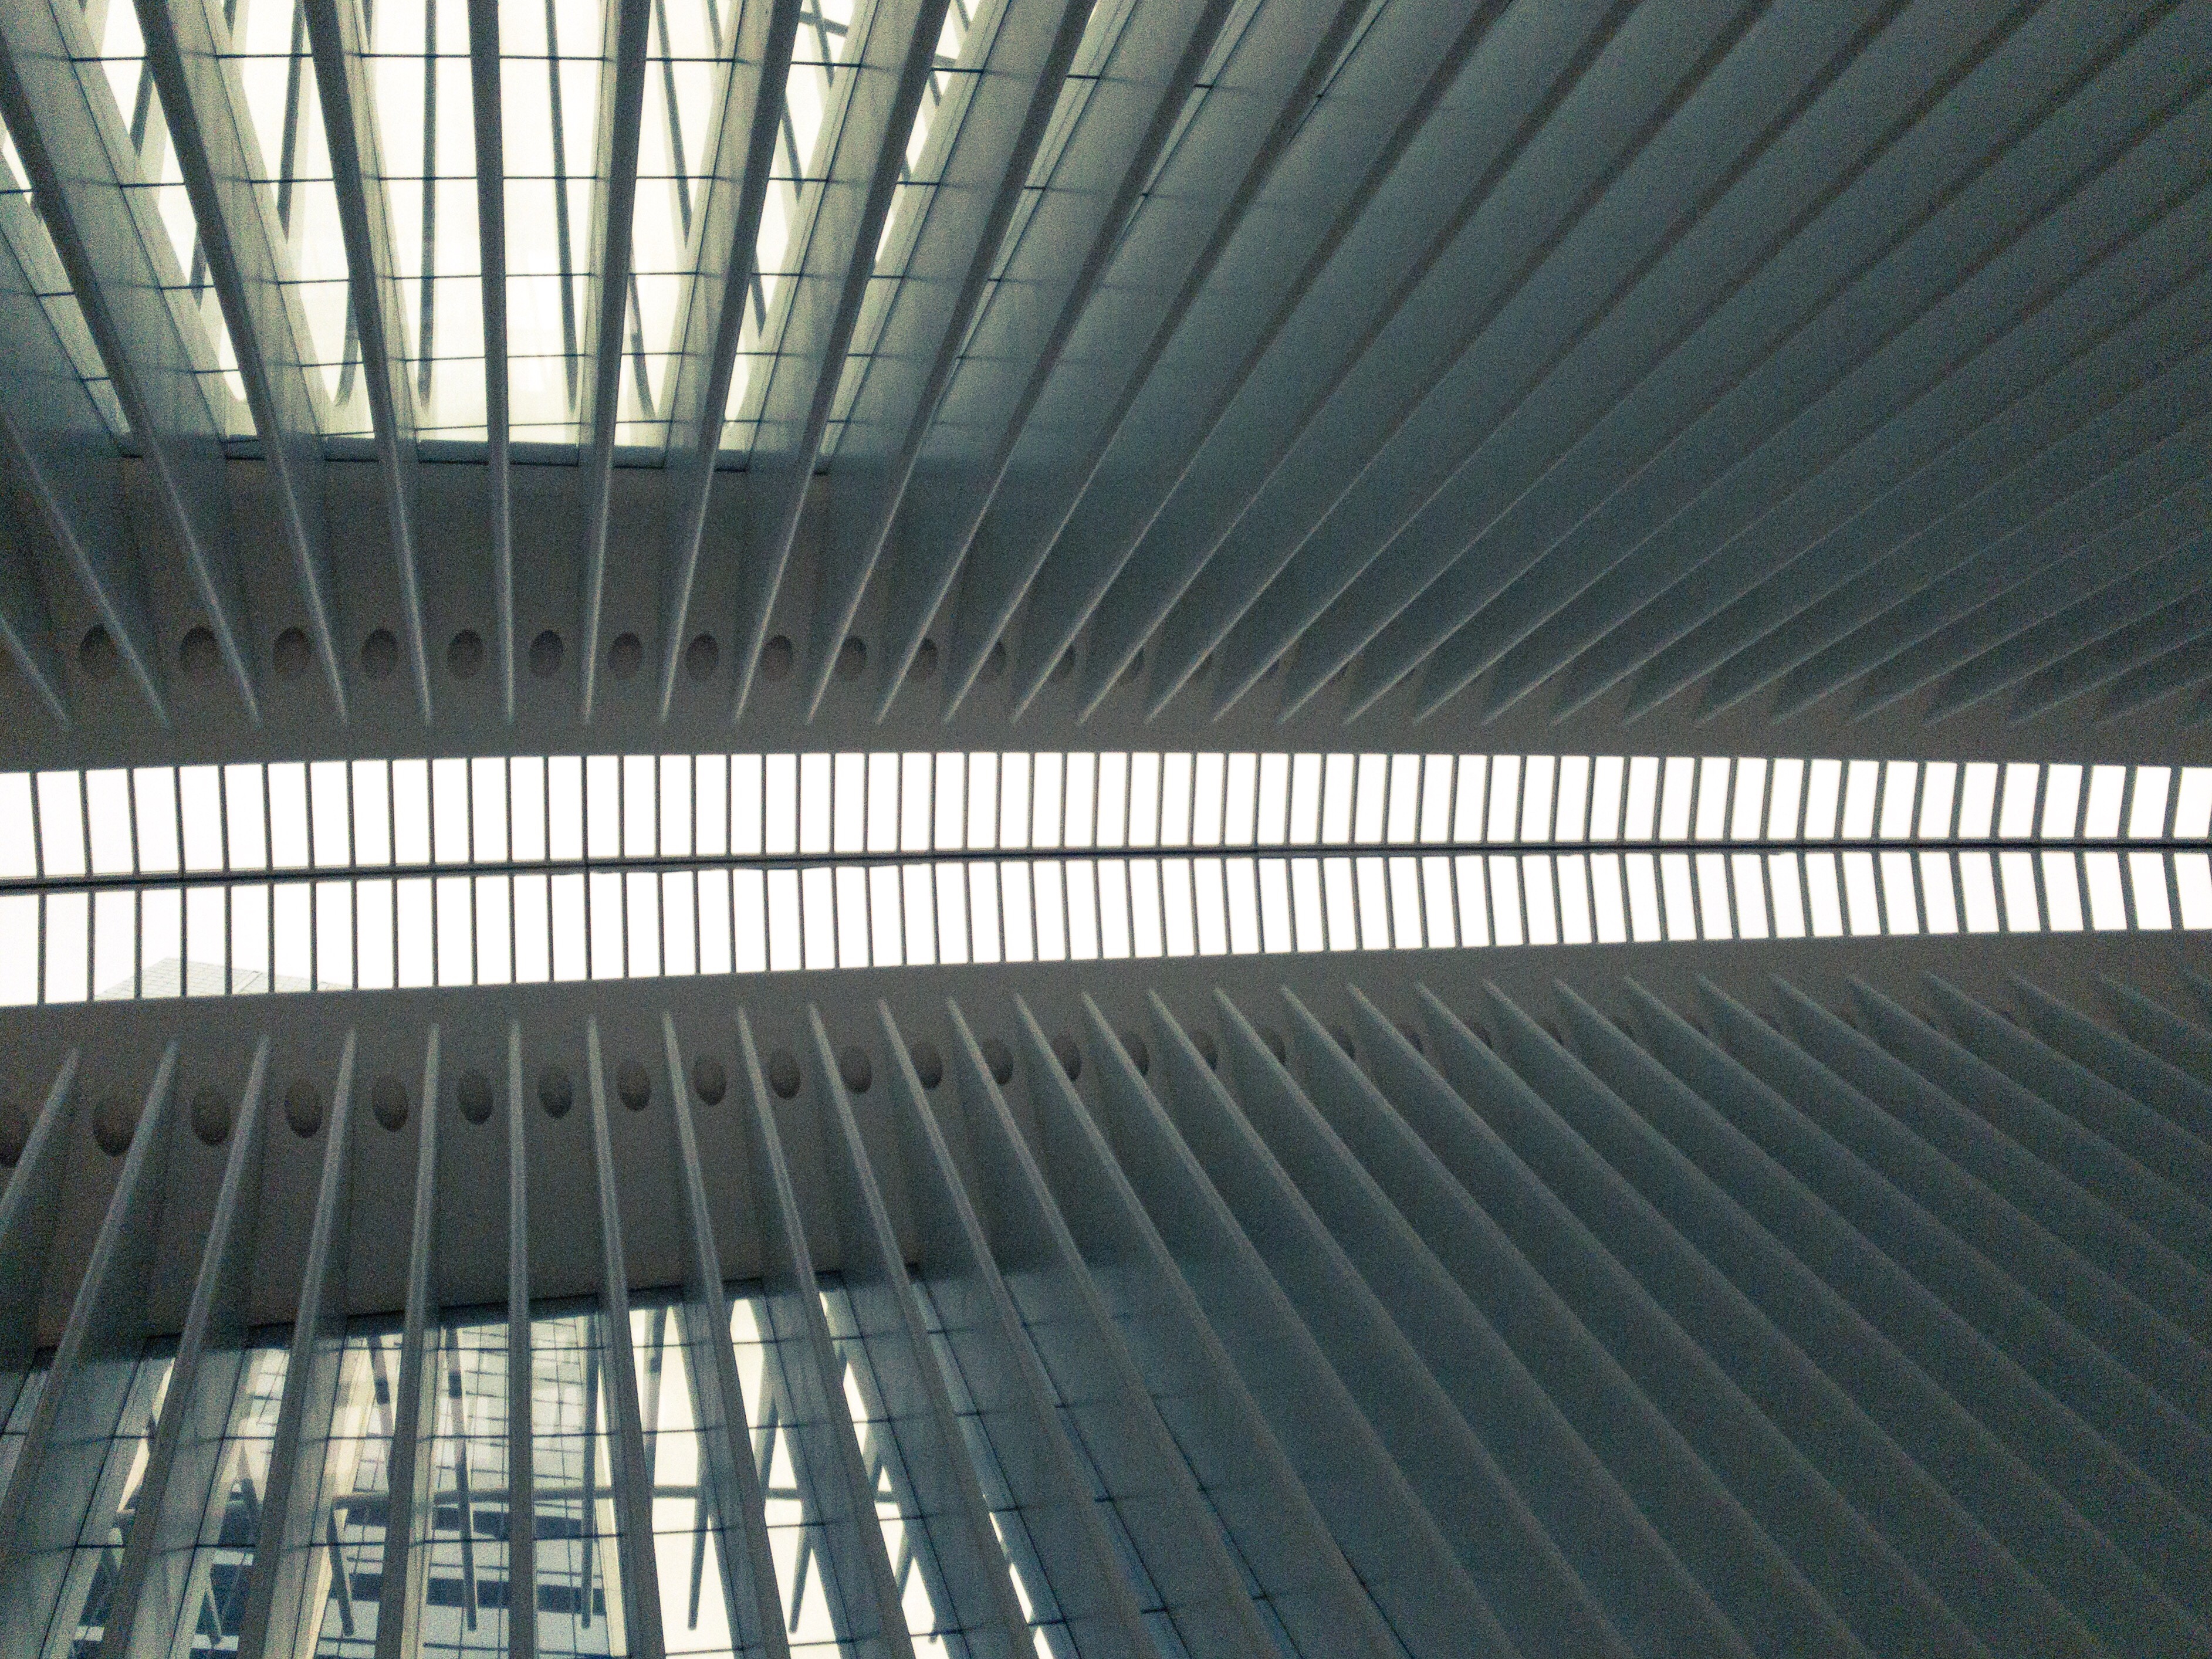 The Oculus at WTC has a rib cage